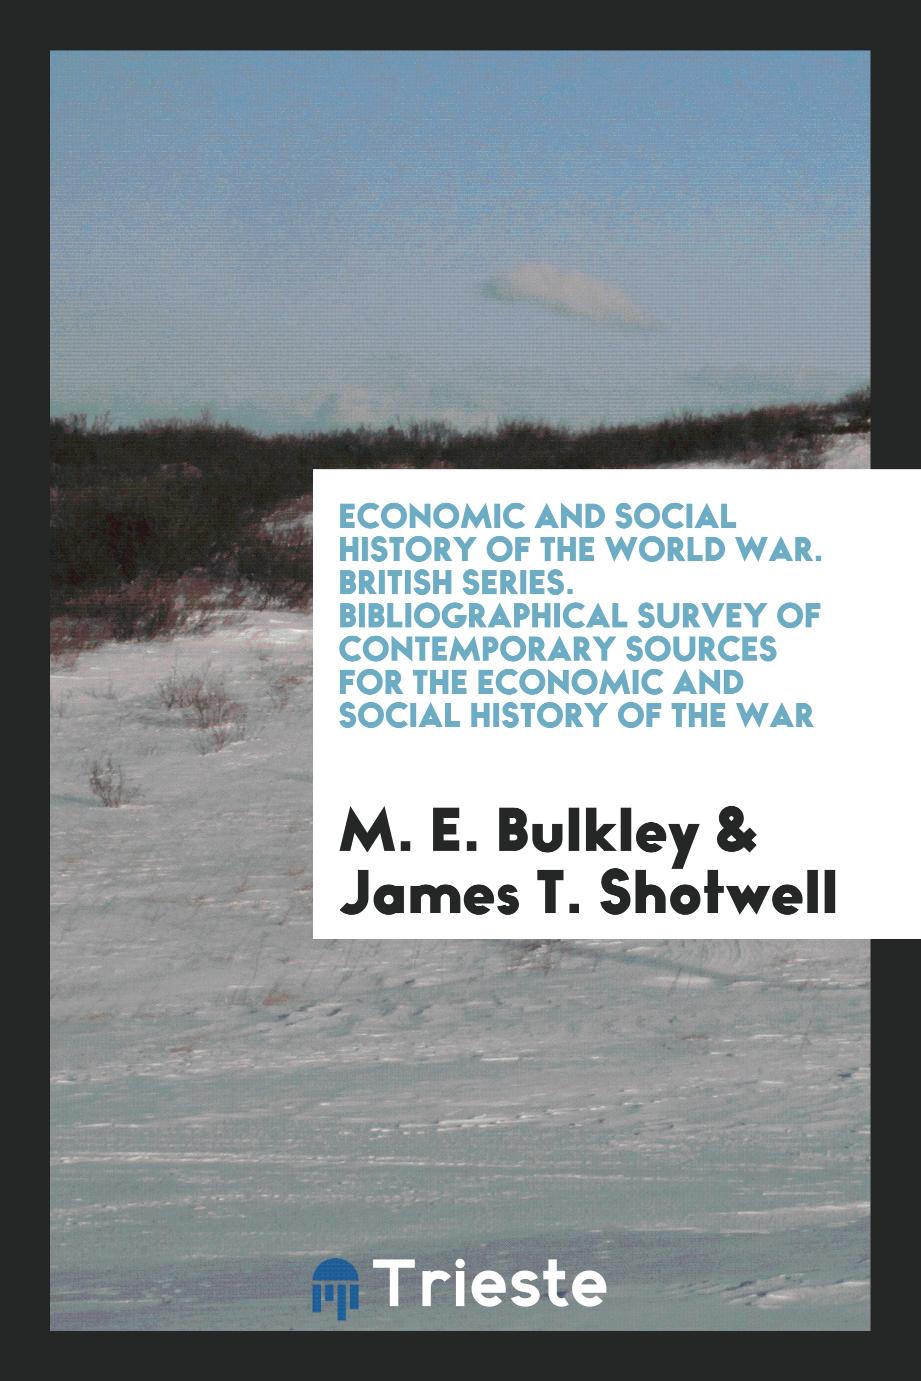 Economic and Social History of the World War. British Series. Bibliographical Survey of Contemporary Sources for the Economic and Social History of the War